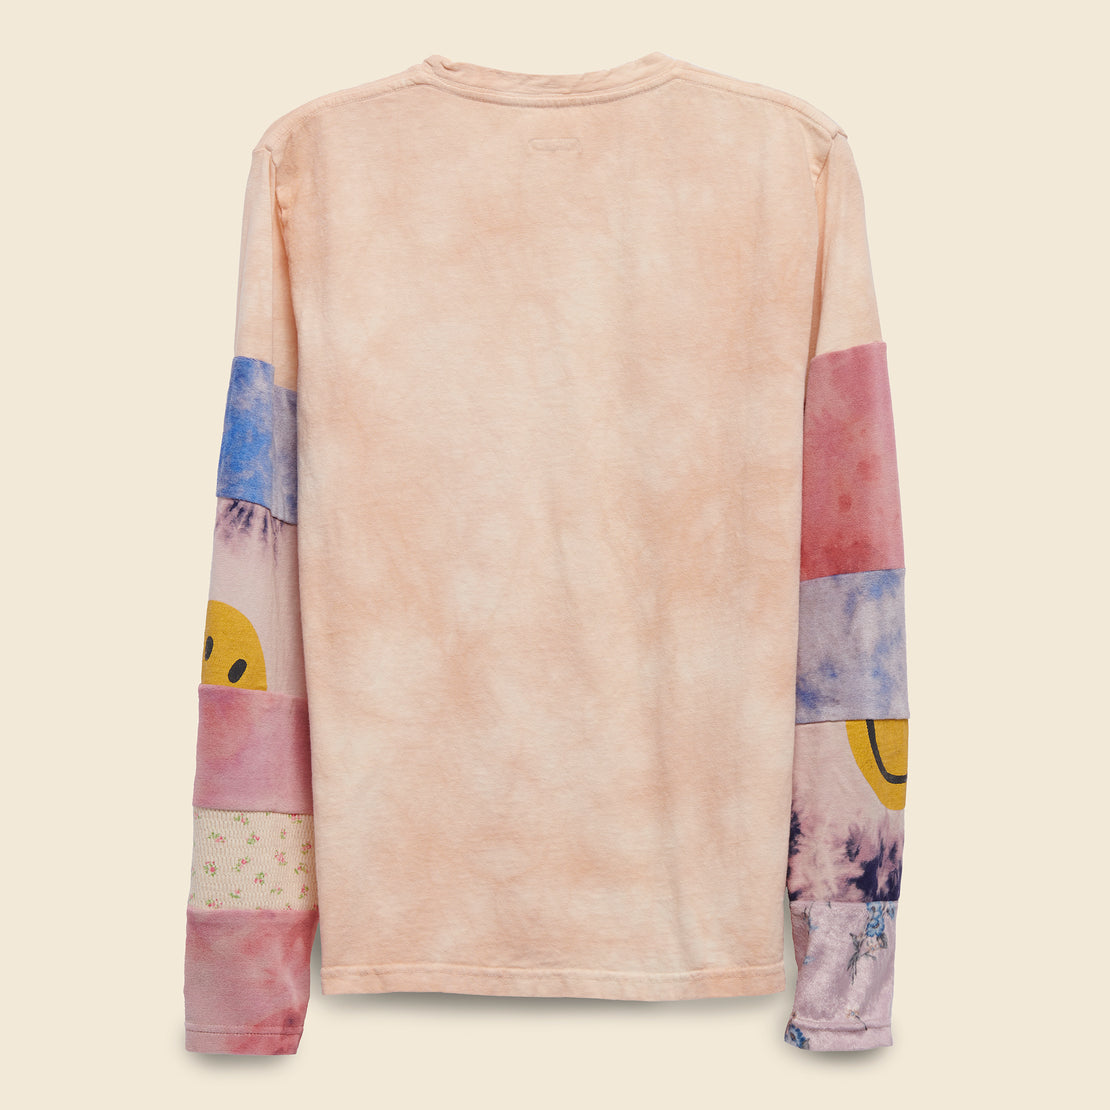 Ashbury Dyed Hippie Tee - Light Pink - Kapital - STAG Provisions - W - Tops - L/S Knit